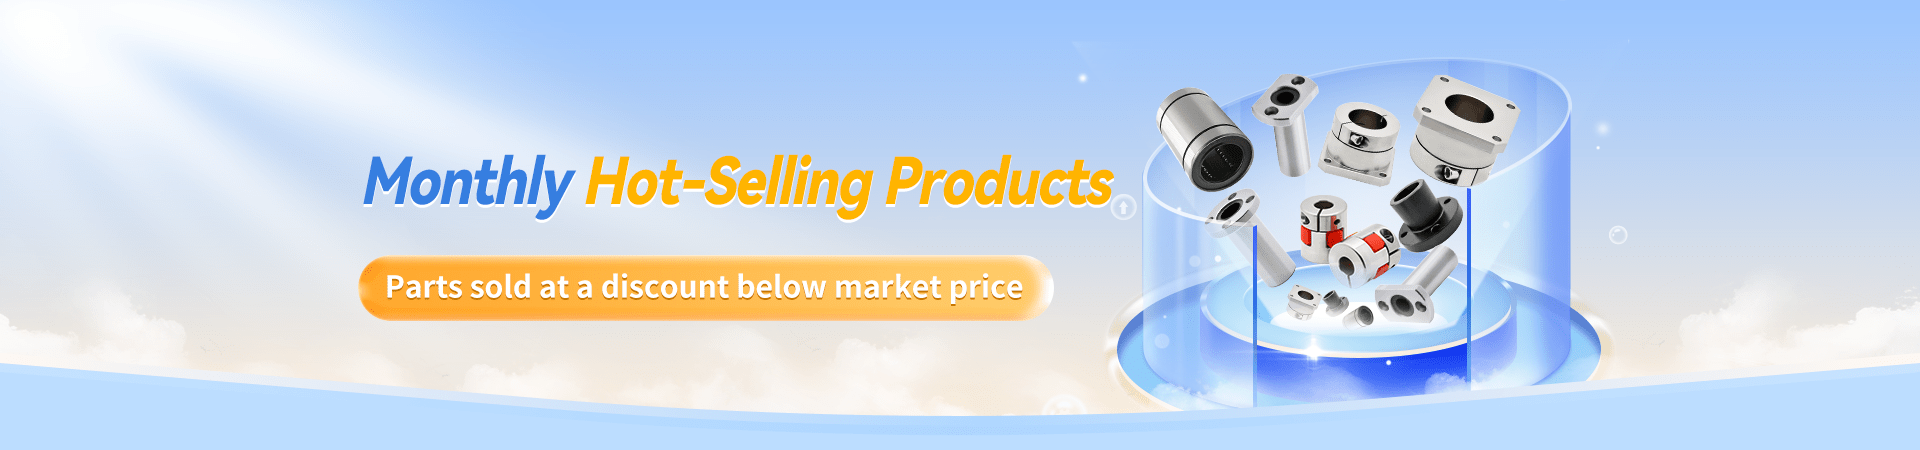 Hot Products-Far East Tech